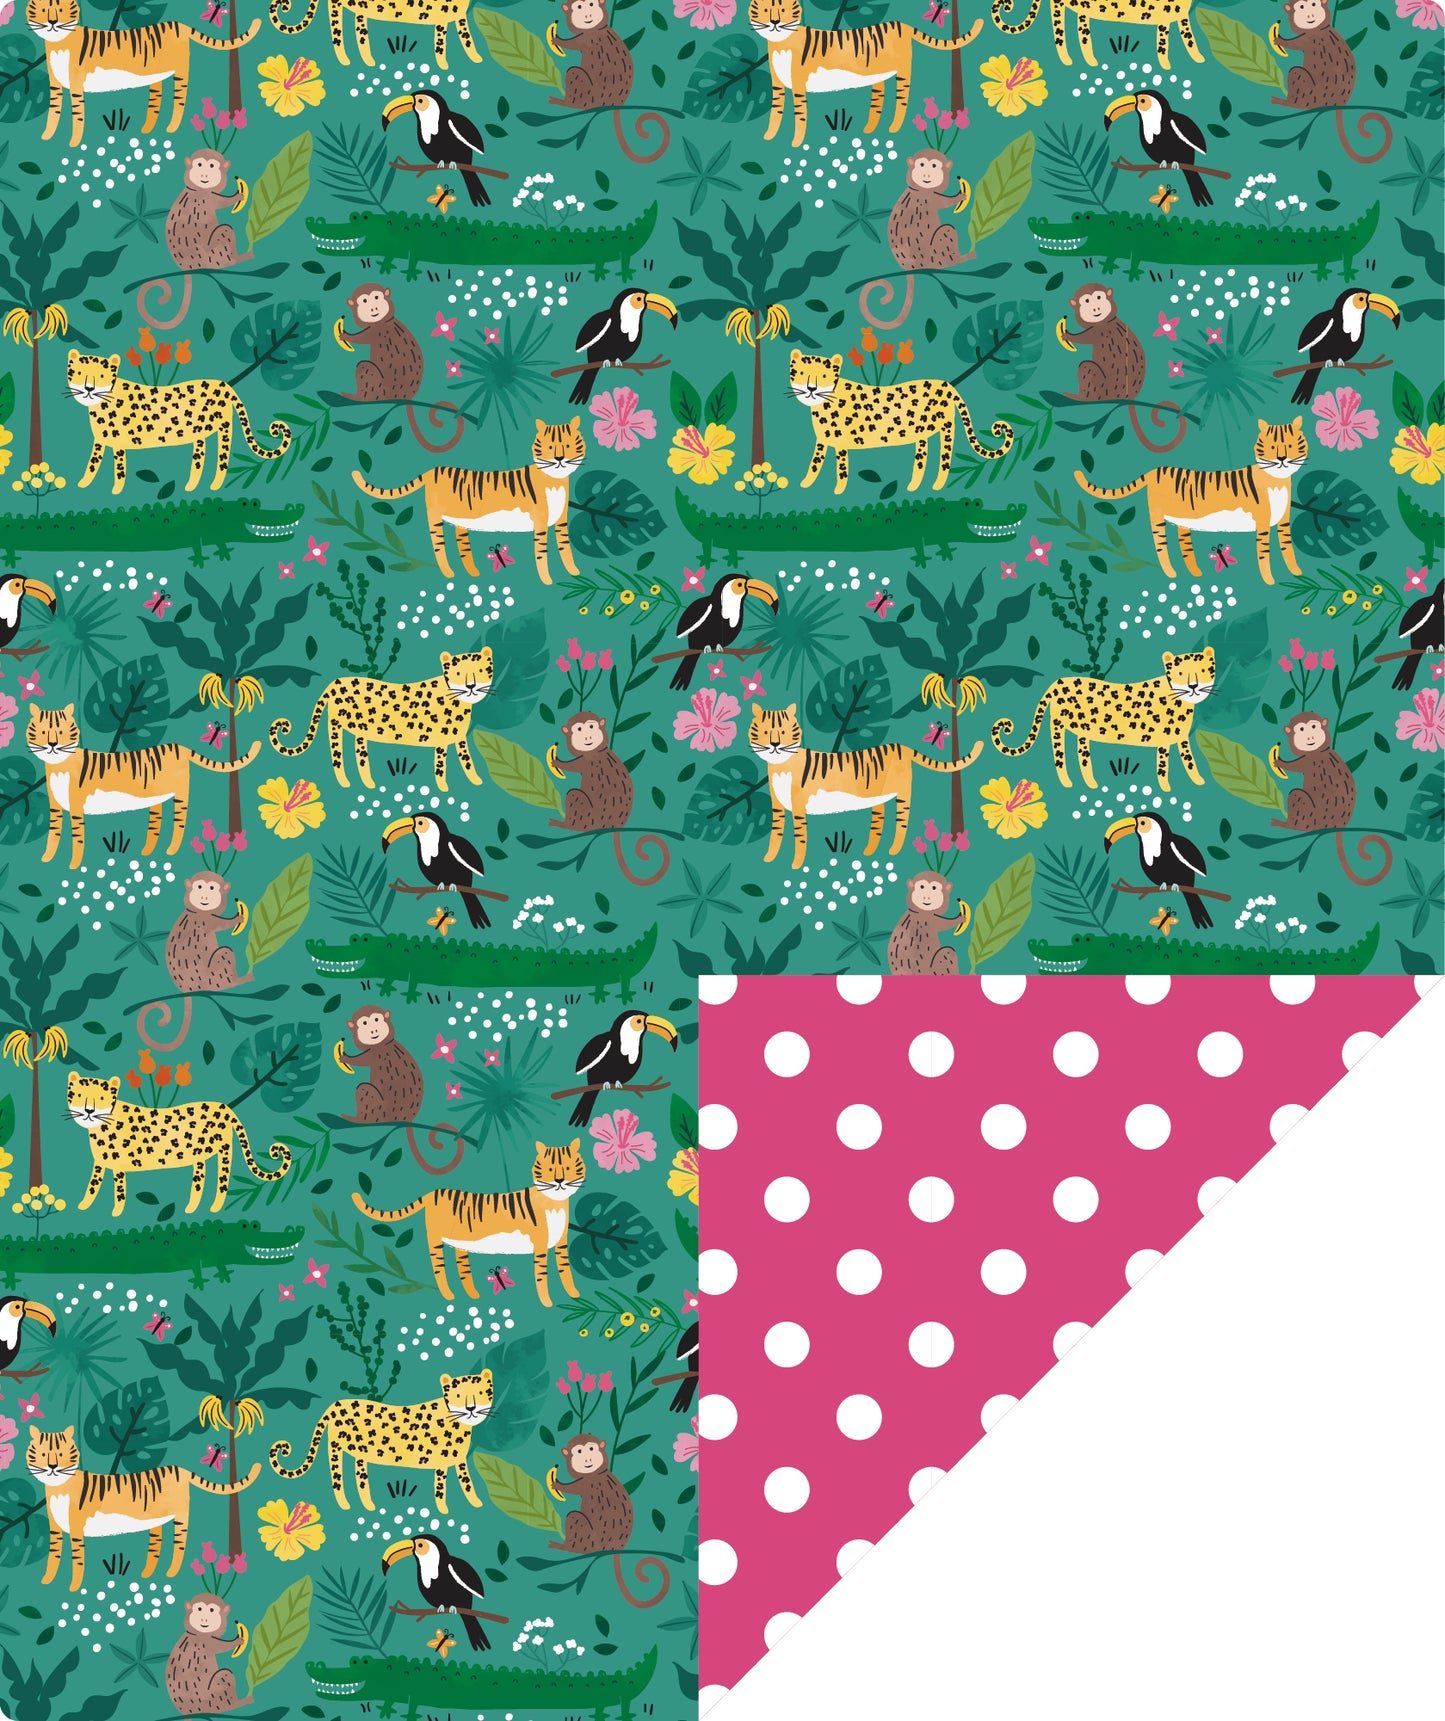 Jungle Kids' Birthday Wrapping Paper with Hot Pink Polka Dot Jumbo Roll Wholesale